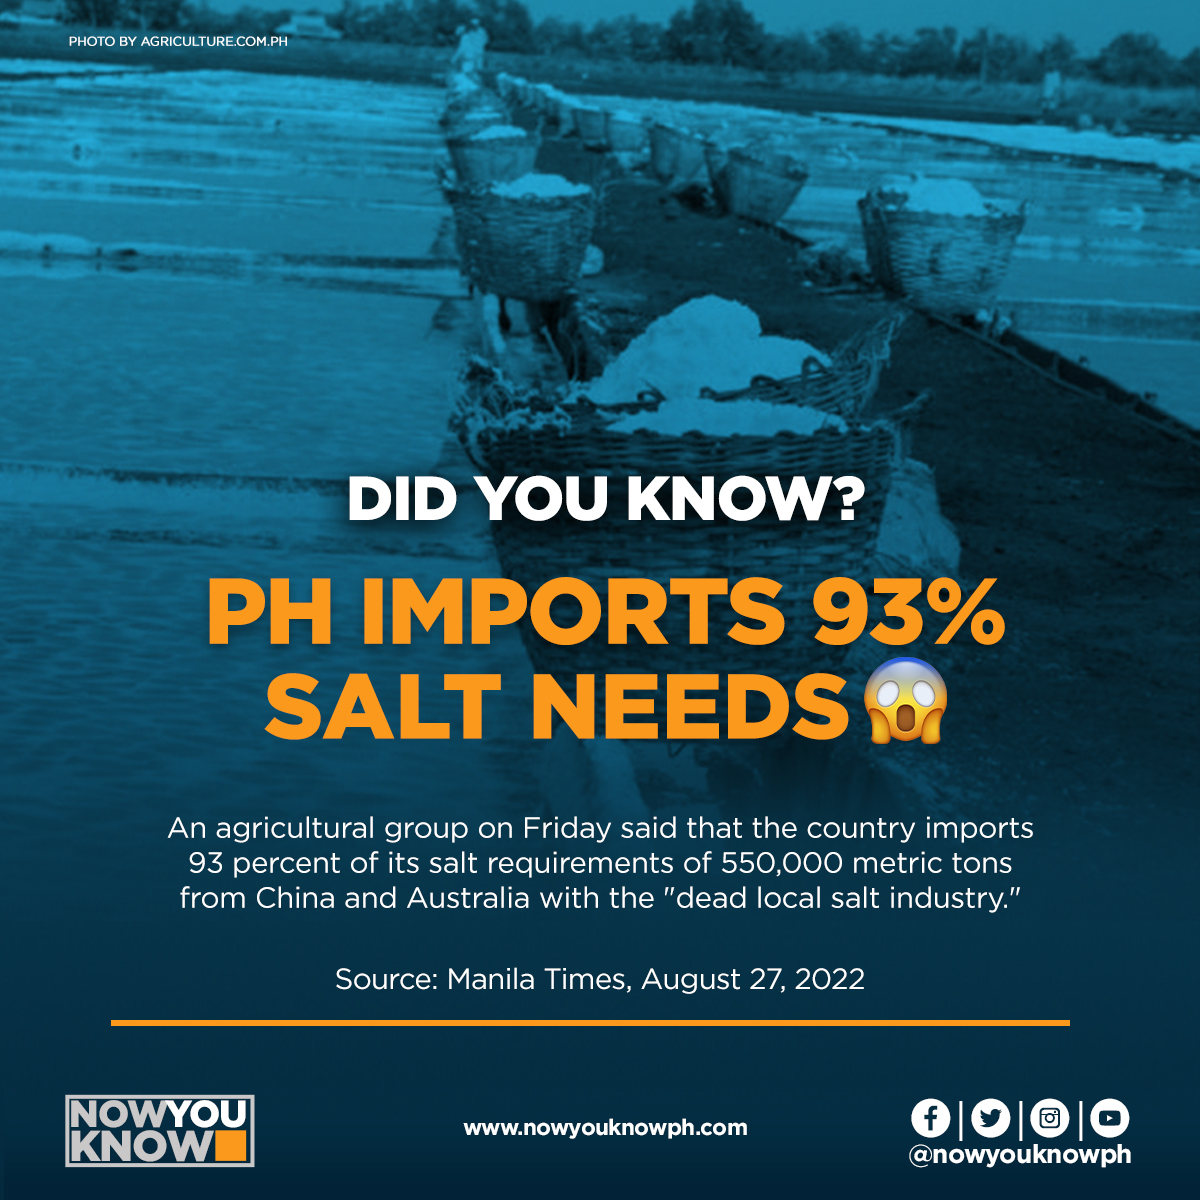 KINULANG SA ASIN?’ An agricultural group on Friday said that the country imports 93 percent of its salt requirements of 550,000 metric tons from China and Australia with the 'dead local salt industry.'